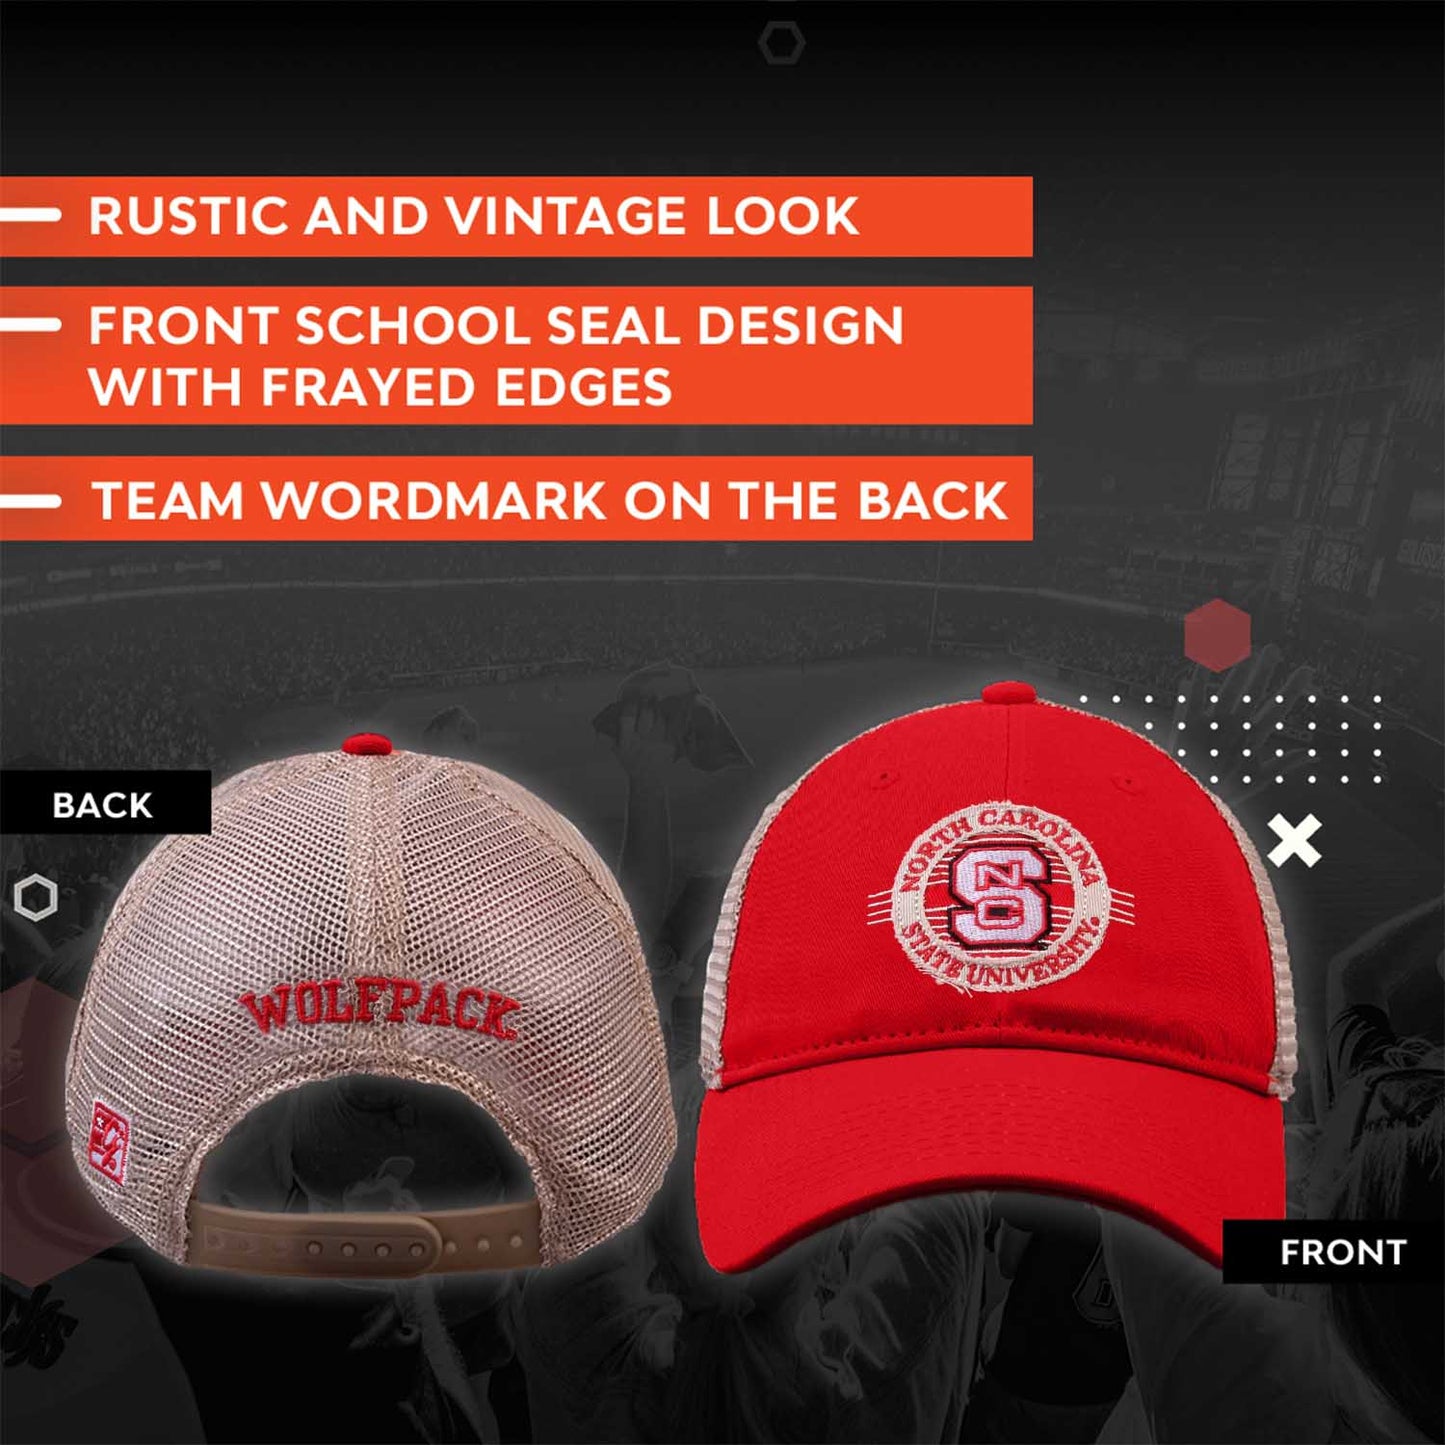 NC State Wolfpack NCAA Snapback - Red